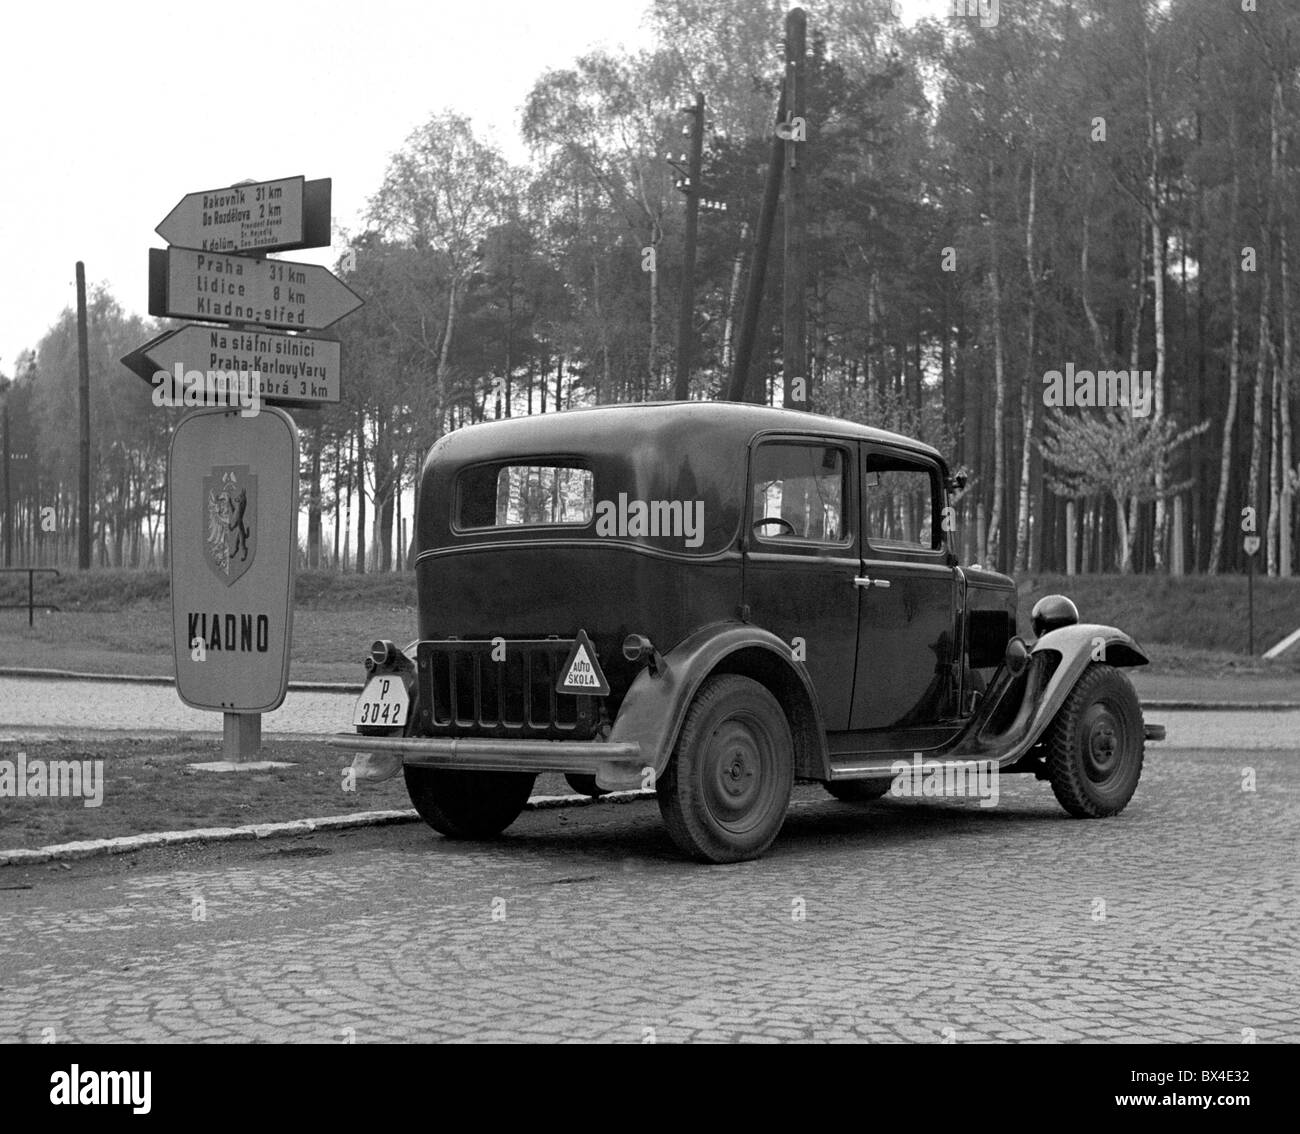 Kladno - Czechoslovakia, 1950. Car driver checks direction signs at intersection. CTK Vintage Photo Stock Photo